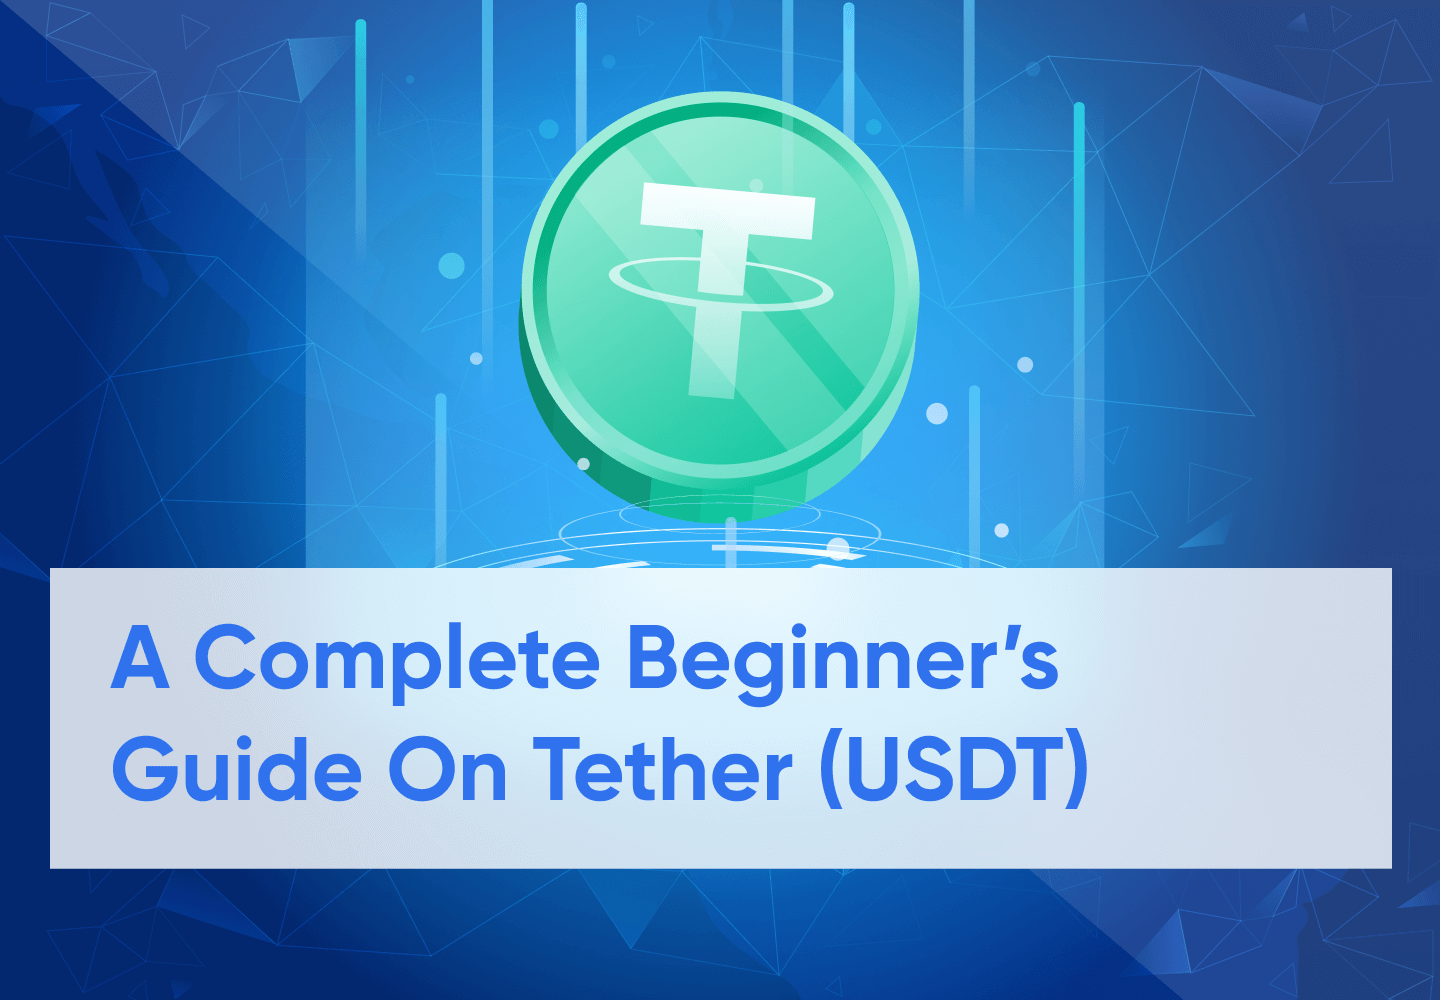 What Is Tether (USDT)?